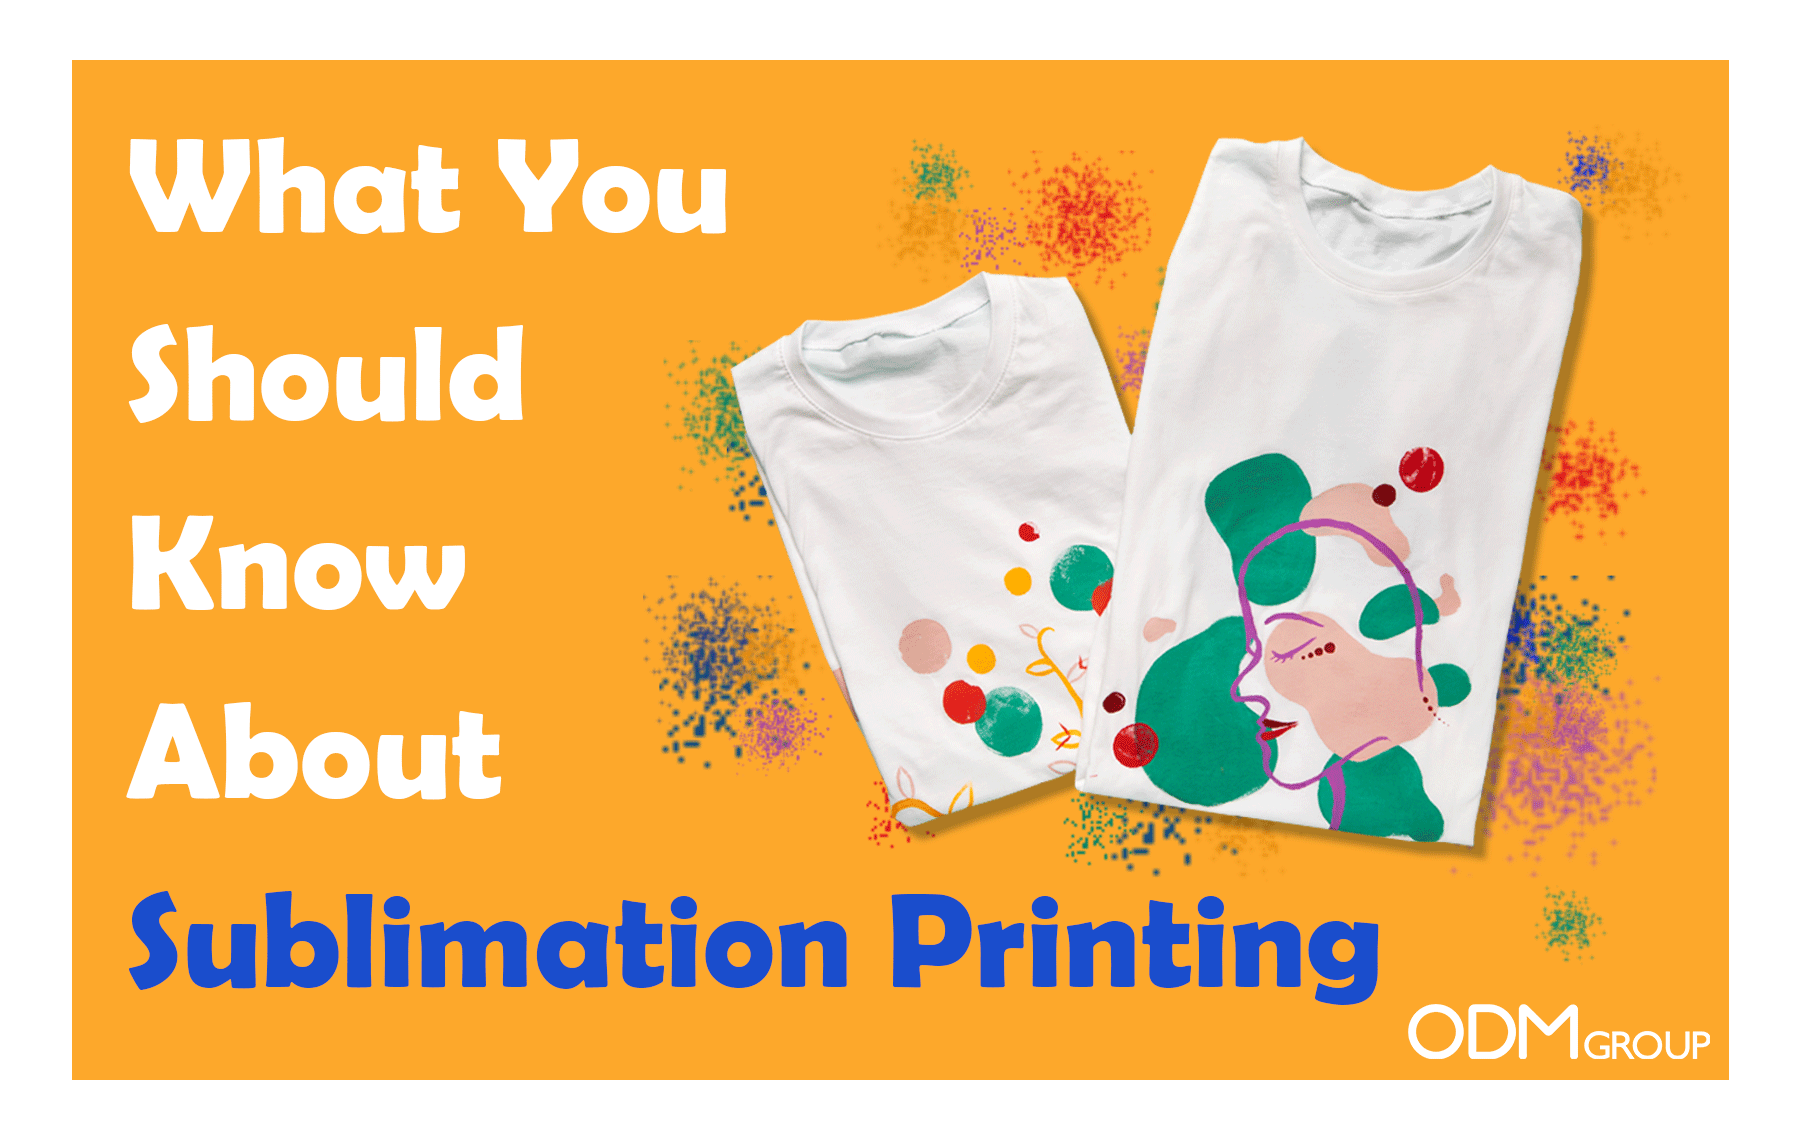 All About Sublimation Printing In Promotional Products